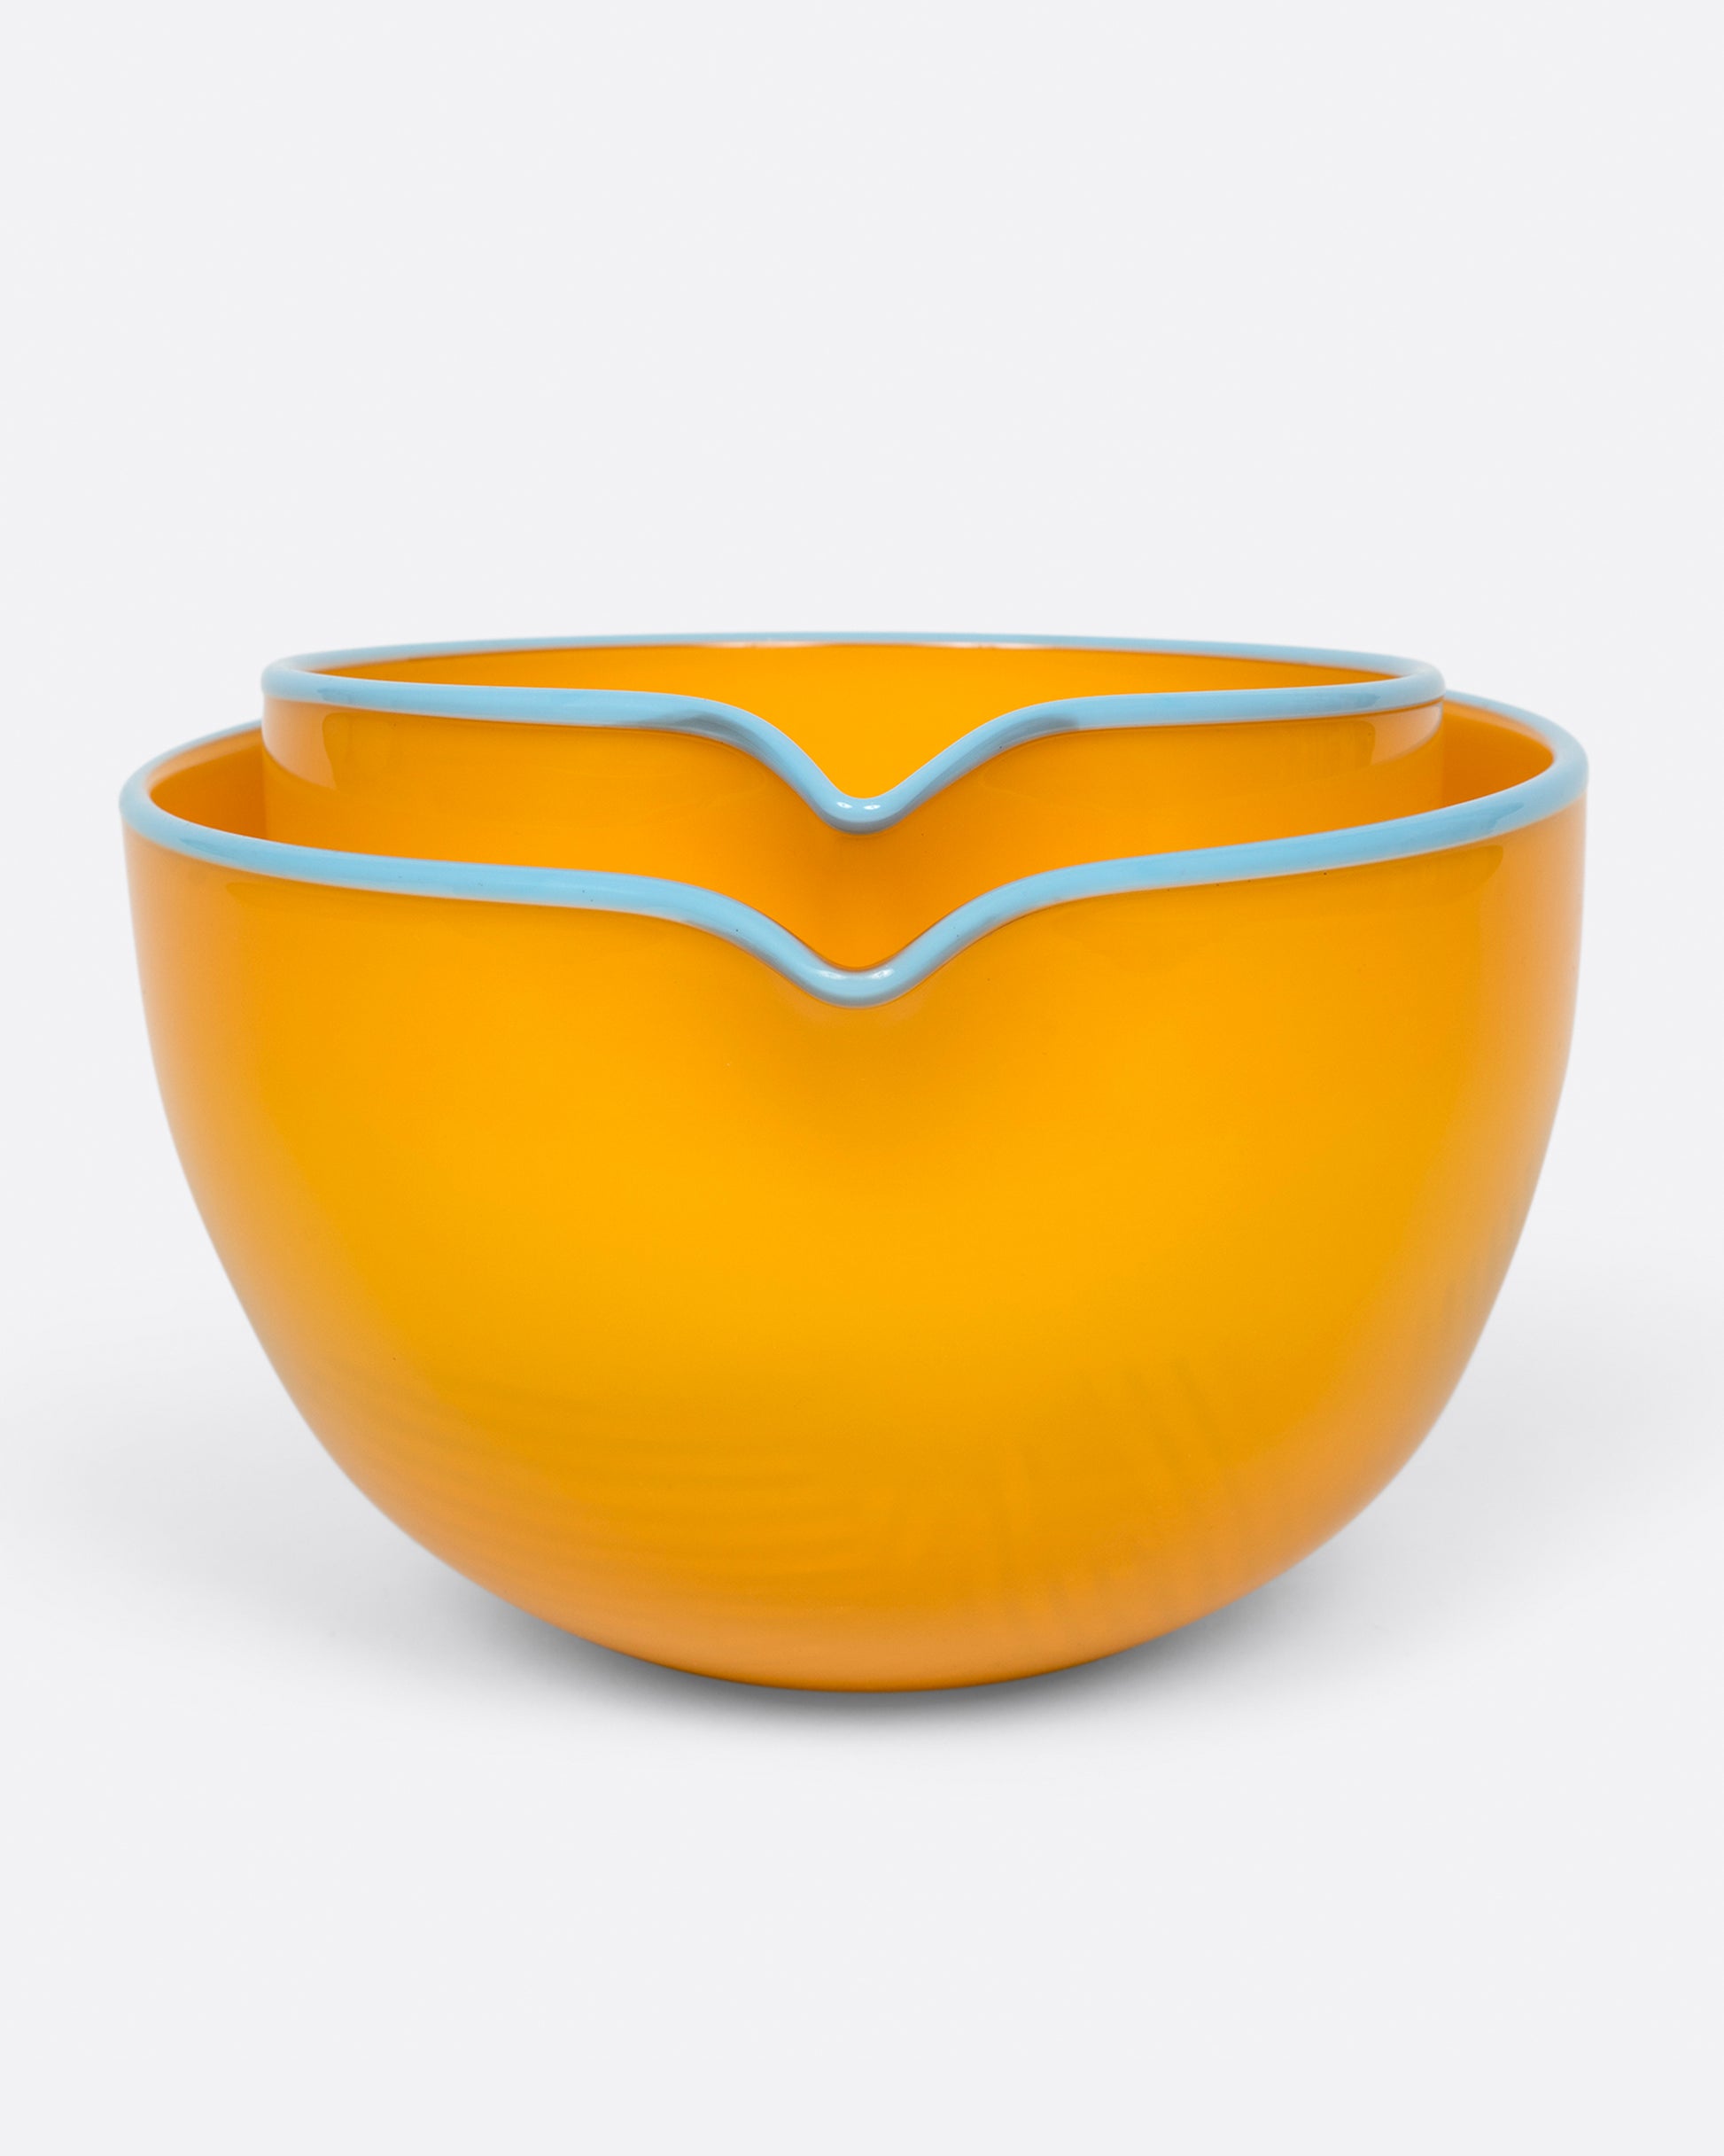 A small marigold spouted glass bowl stacked inside a large marigold spouted bowl.